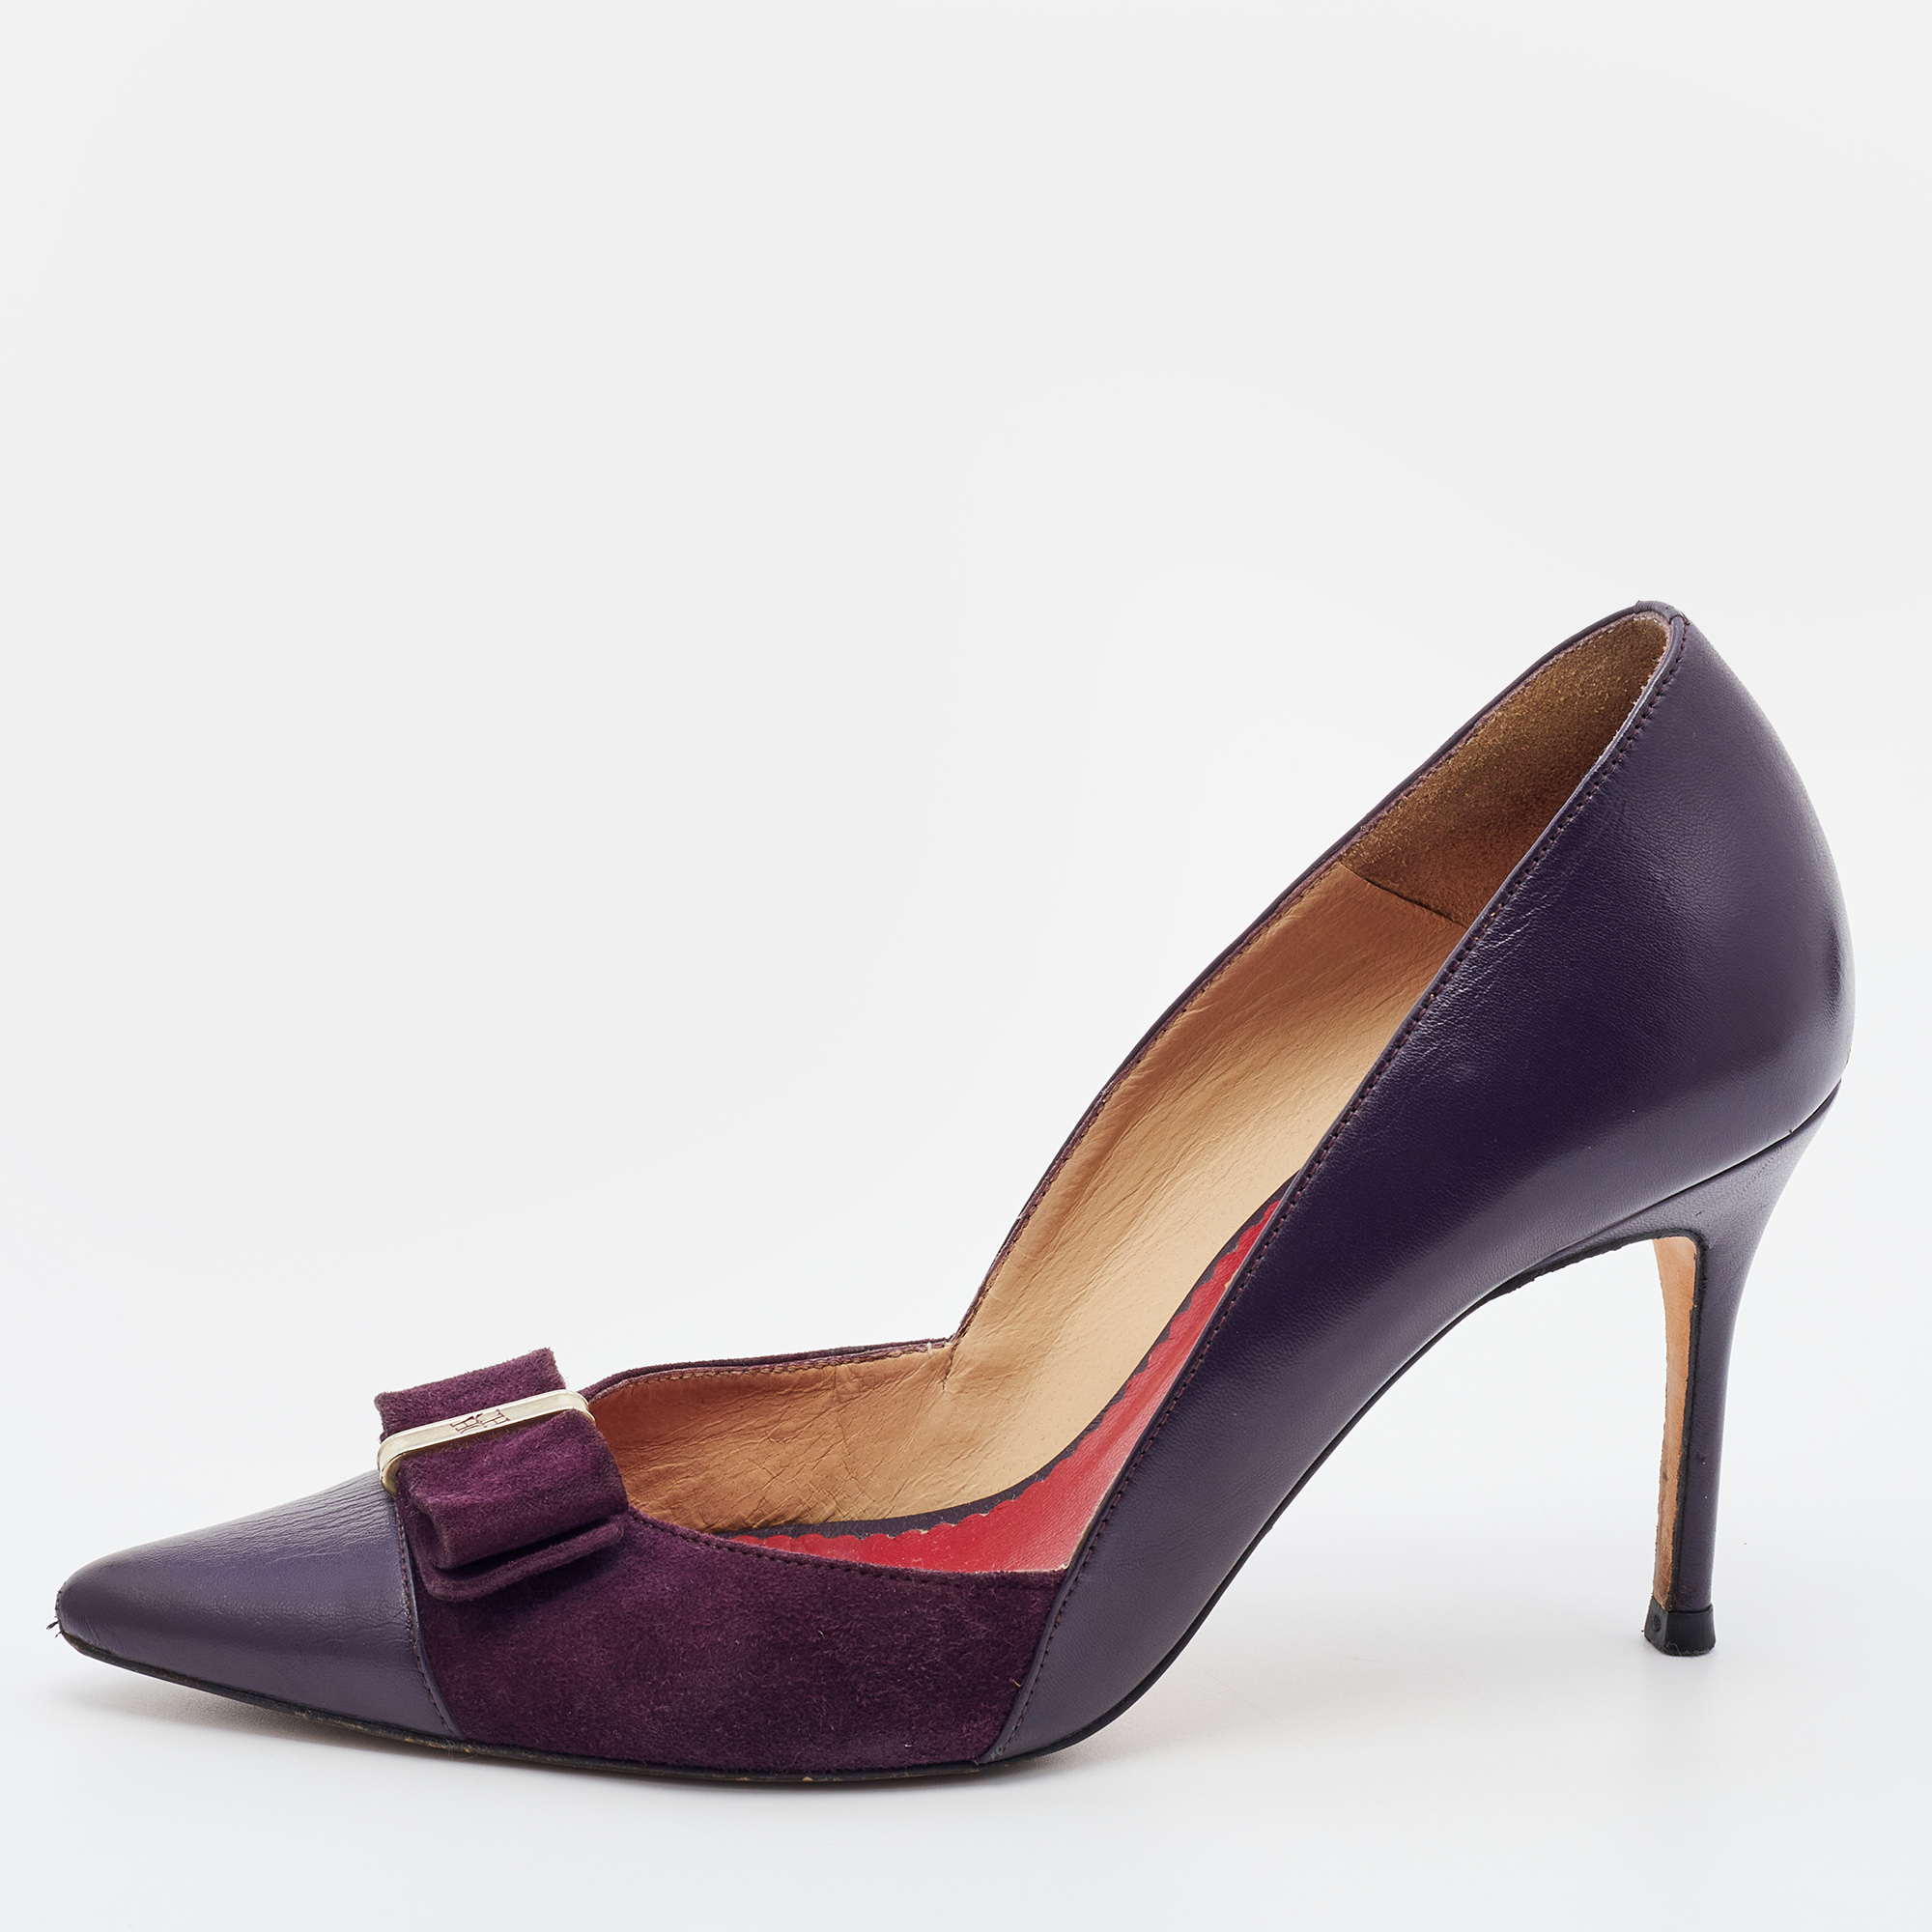 

CH Carolina Herrera Purple Suede And Leather Pointed Cap Toe Pumps Size